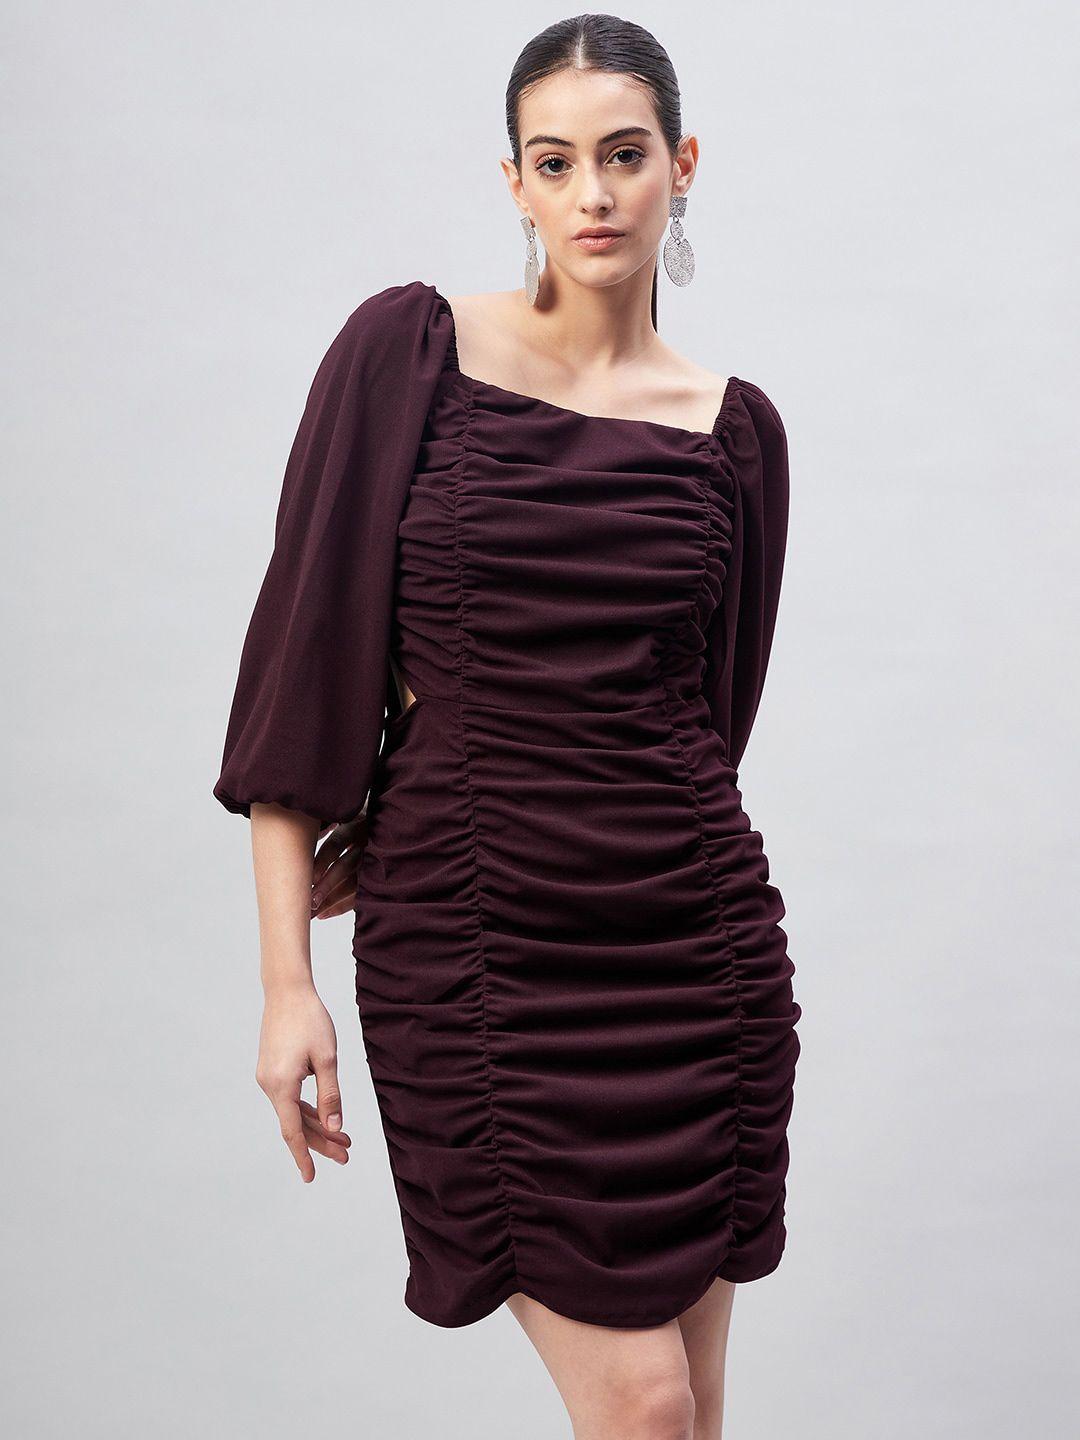 marie claire sheath ruched dress